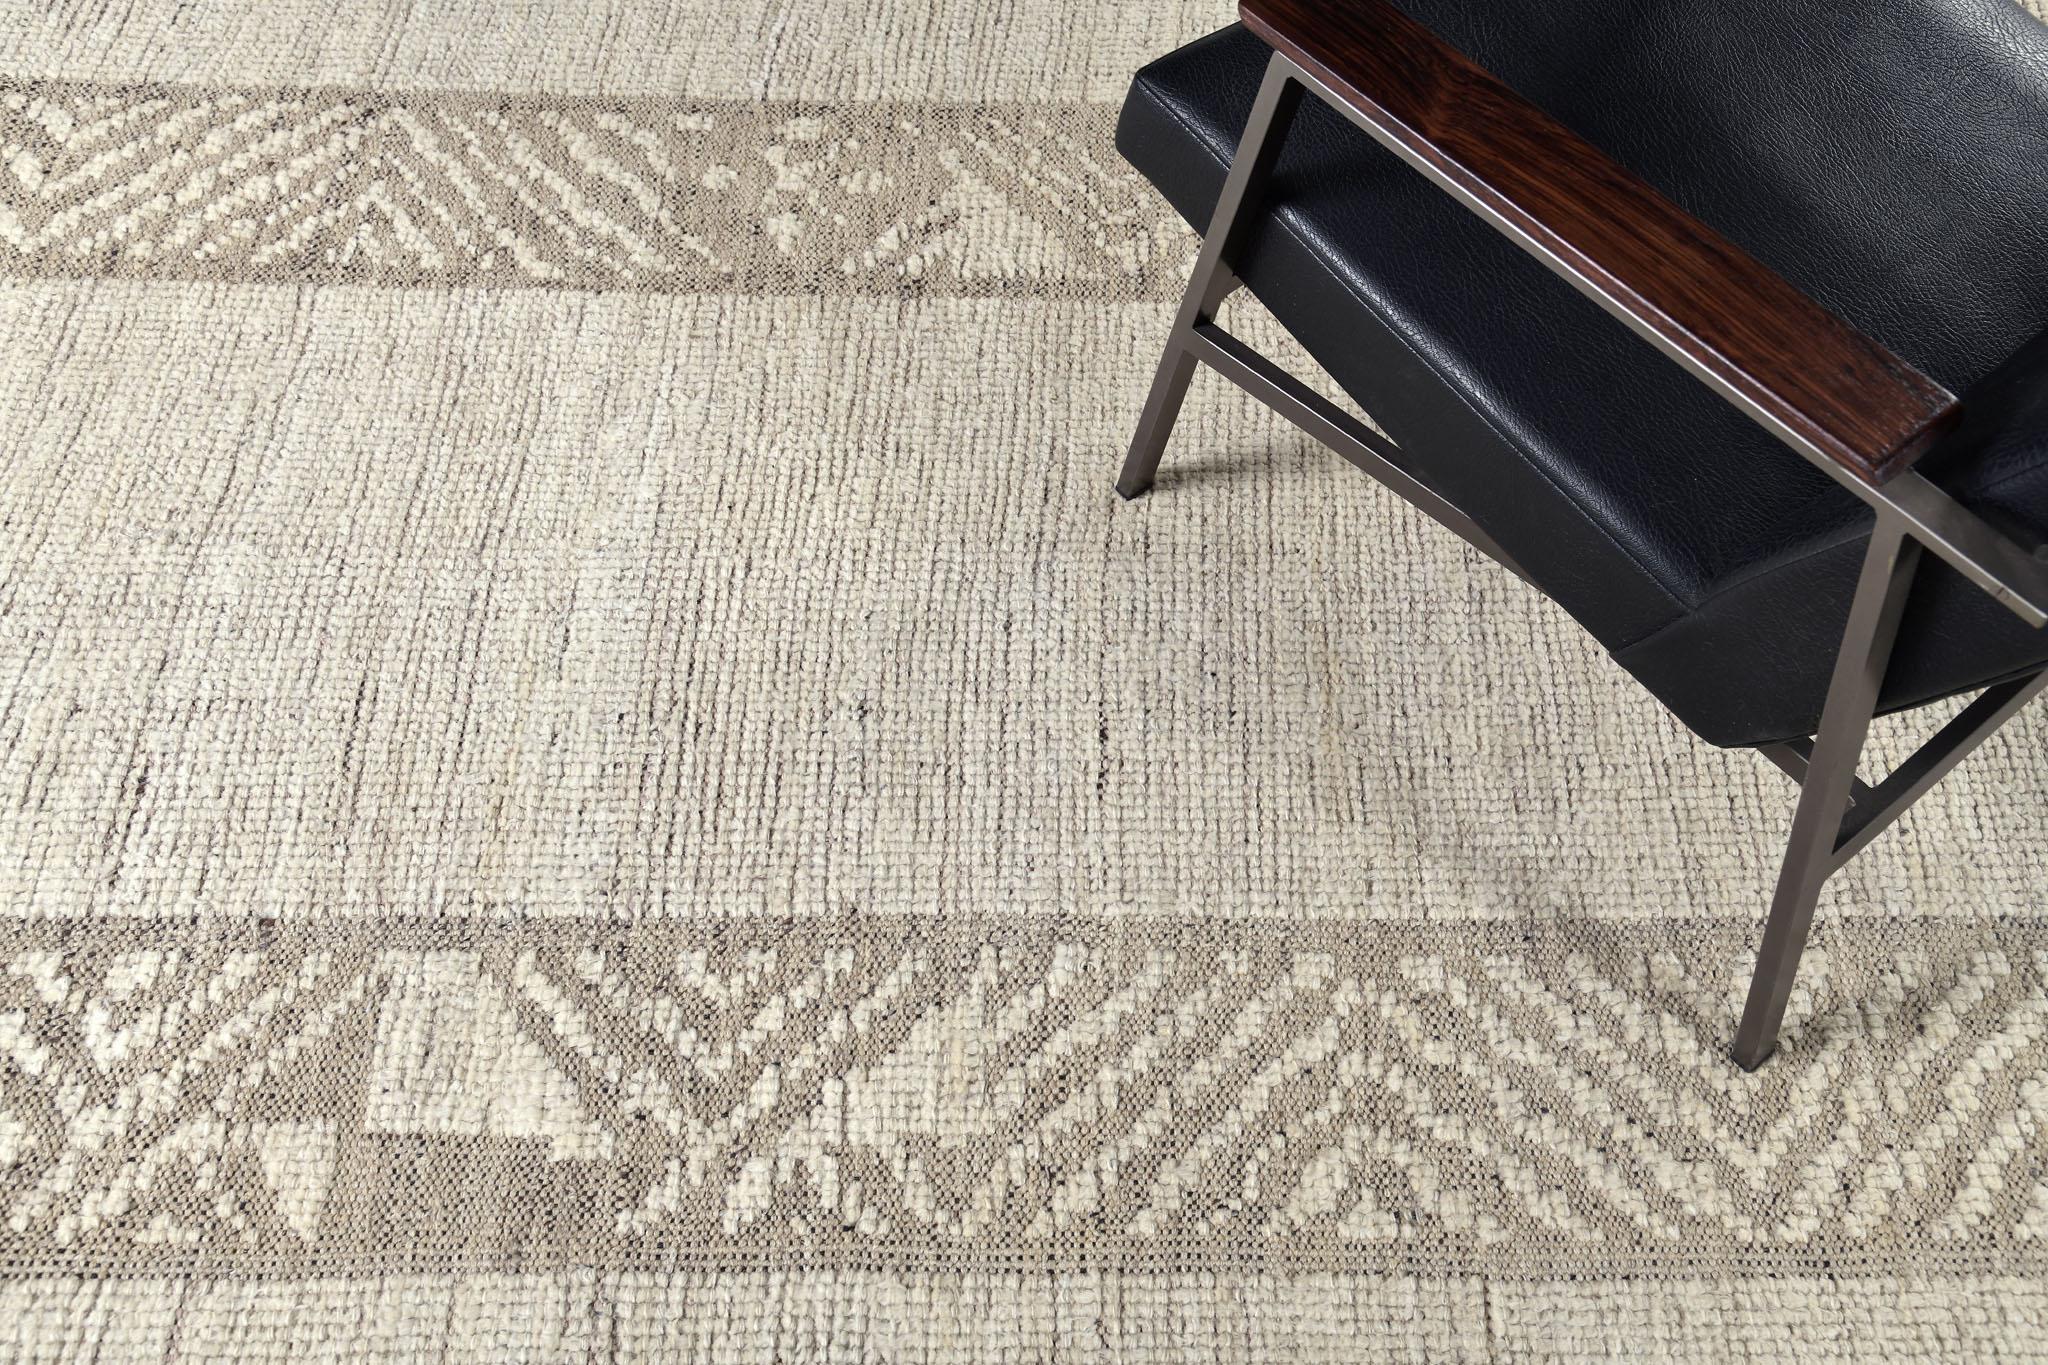 Abrolhos is a handwoven luxurious wool rug with timeless embossed detailing. In addition to its perfect brown flatweave, Albrohos has a beautiful shag that brings a lustrous texture and contemporary feel to one's space. The Haute Bohemian collection